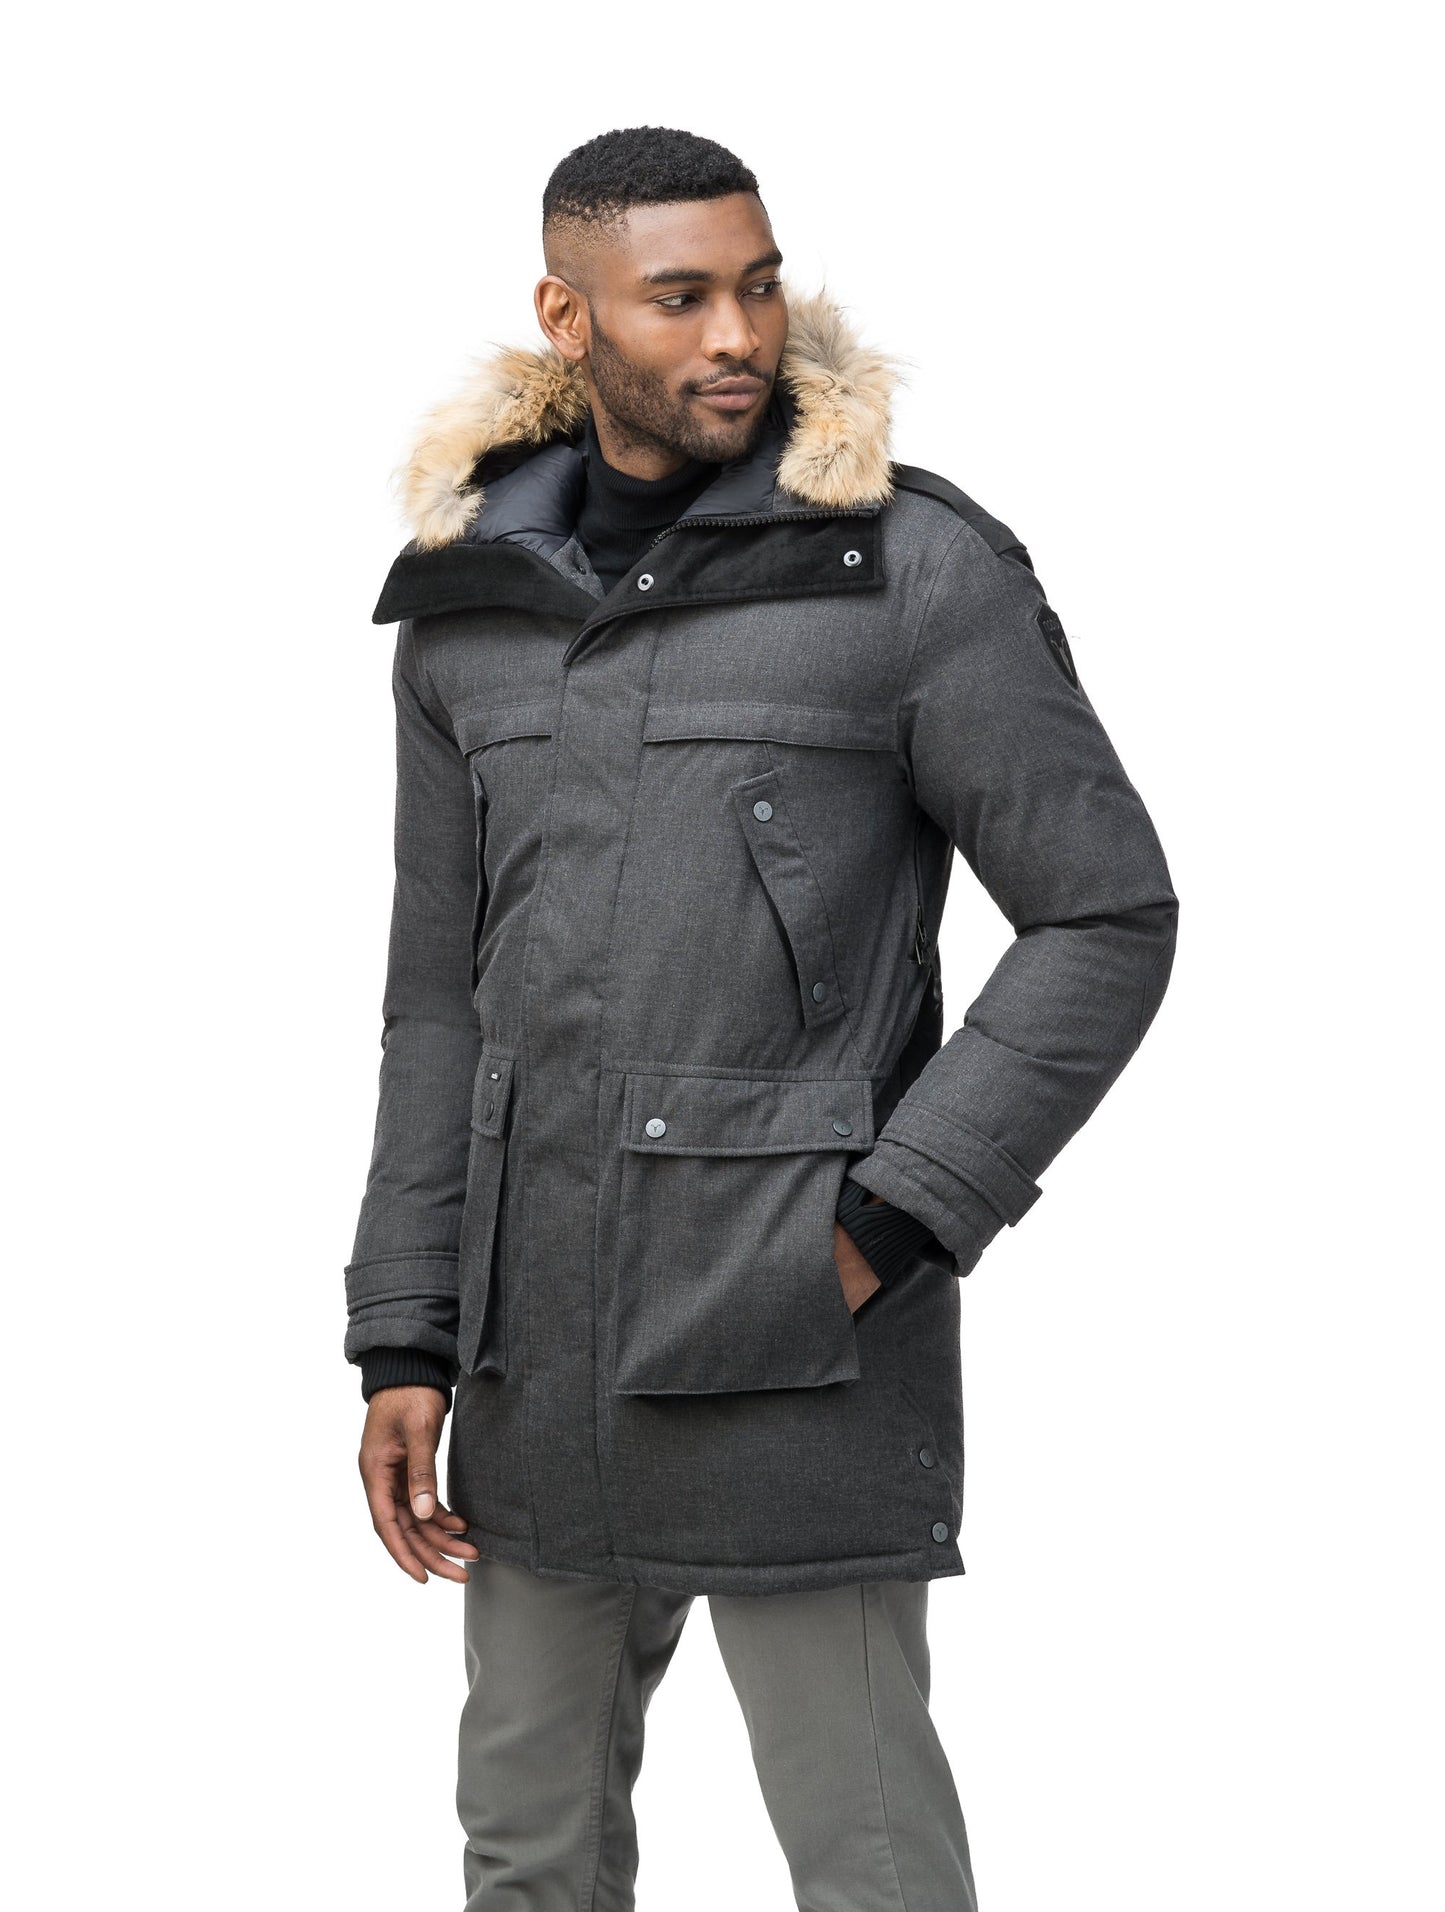 Men's Best Selling Parka the Yatesy is a down filled jacket with a zipper closure and magnetic placket in H. Charcoal